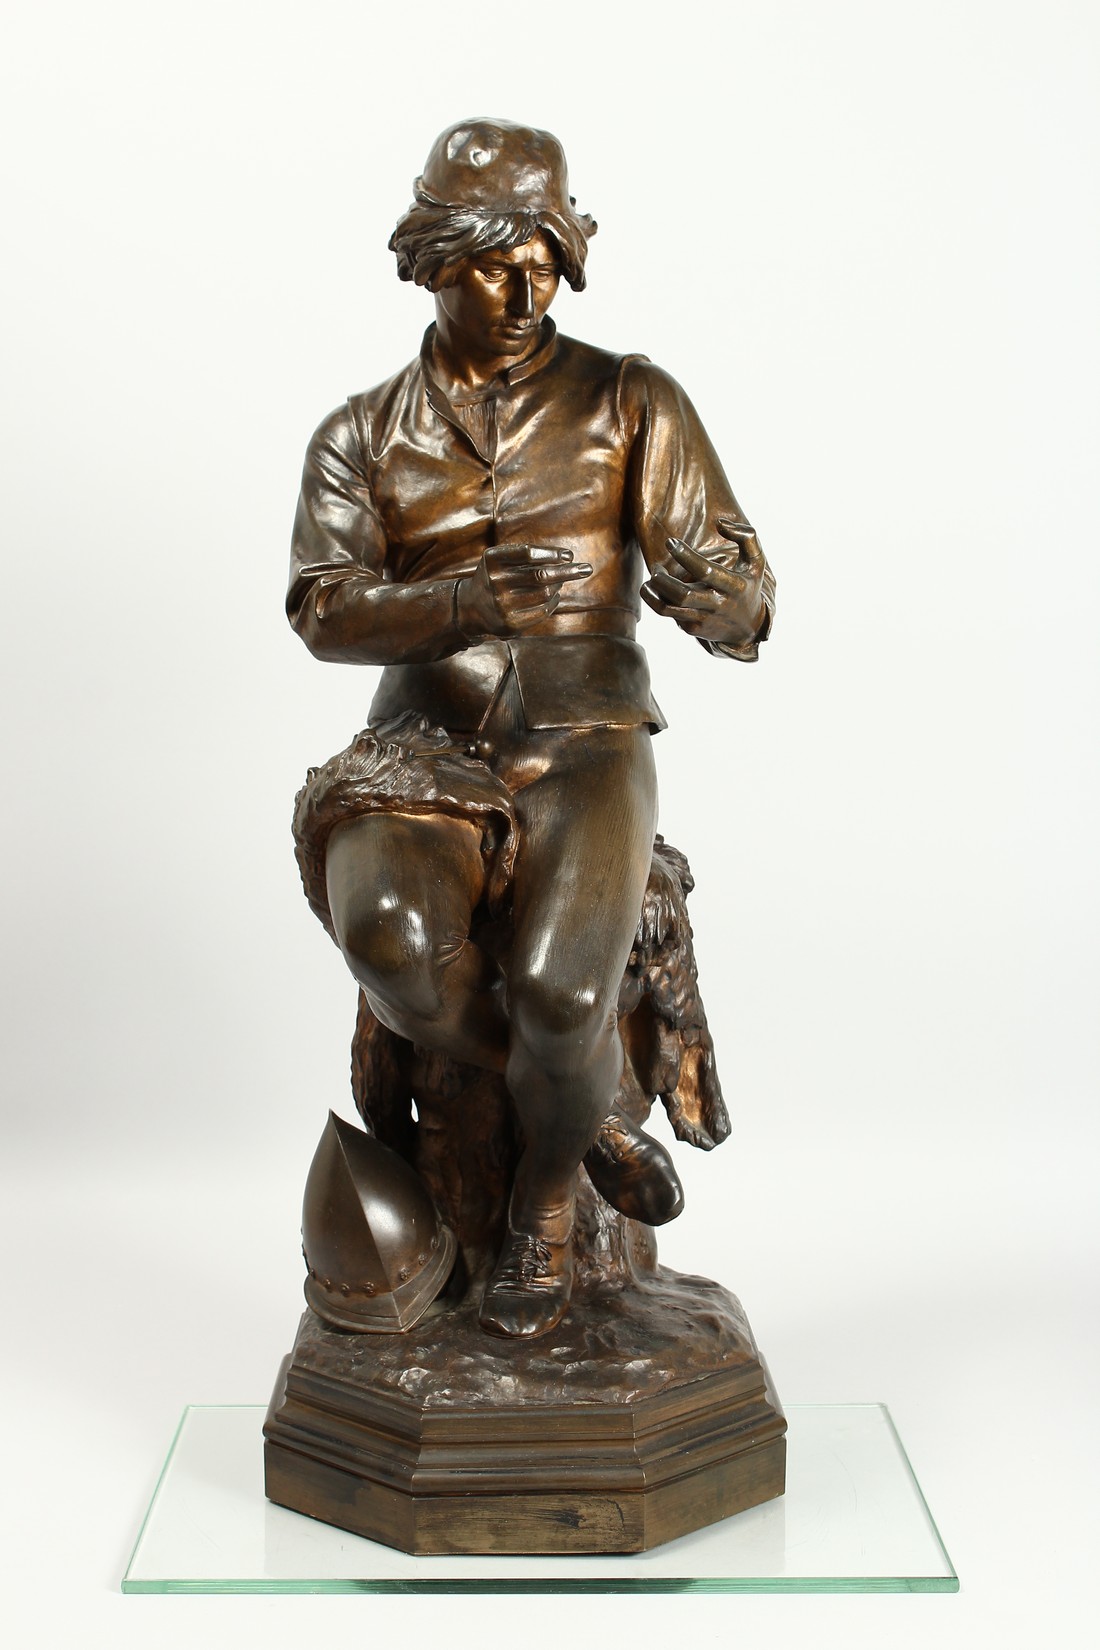 C. MANICLIER. A LARGE BRONZE OF A YOUNG MAN, seated on a tree stump with octagonal base. Signed